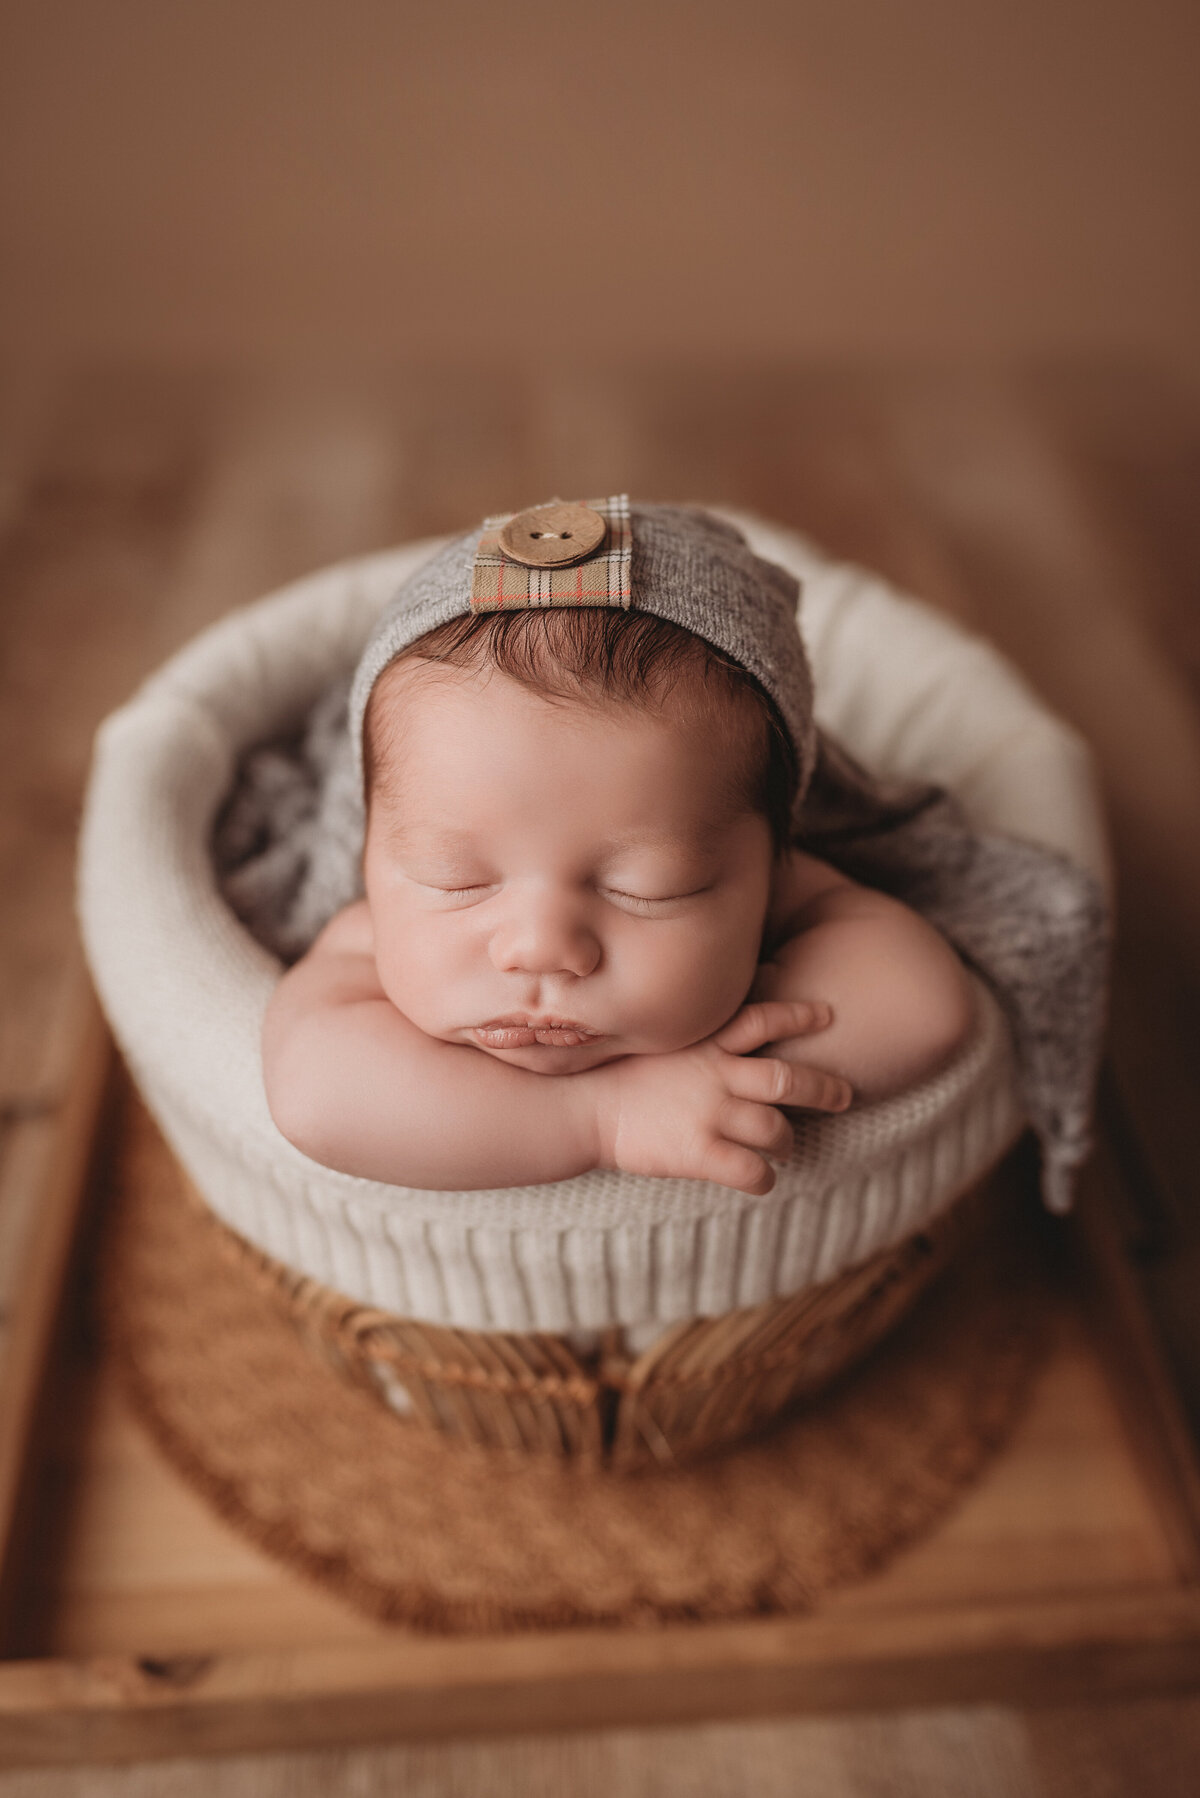 Newborn baby boy sitting in a rattan basket with hands under chin, wearing a gray sleepy cap on wooden backdrop